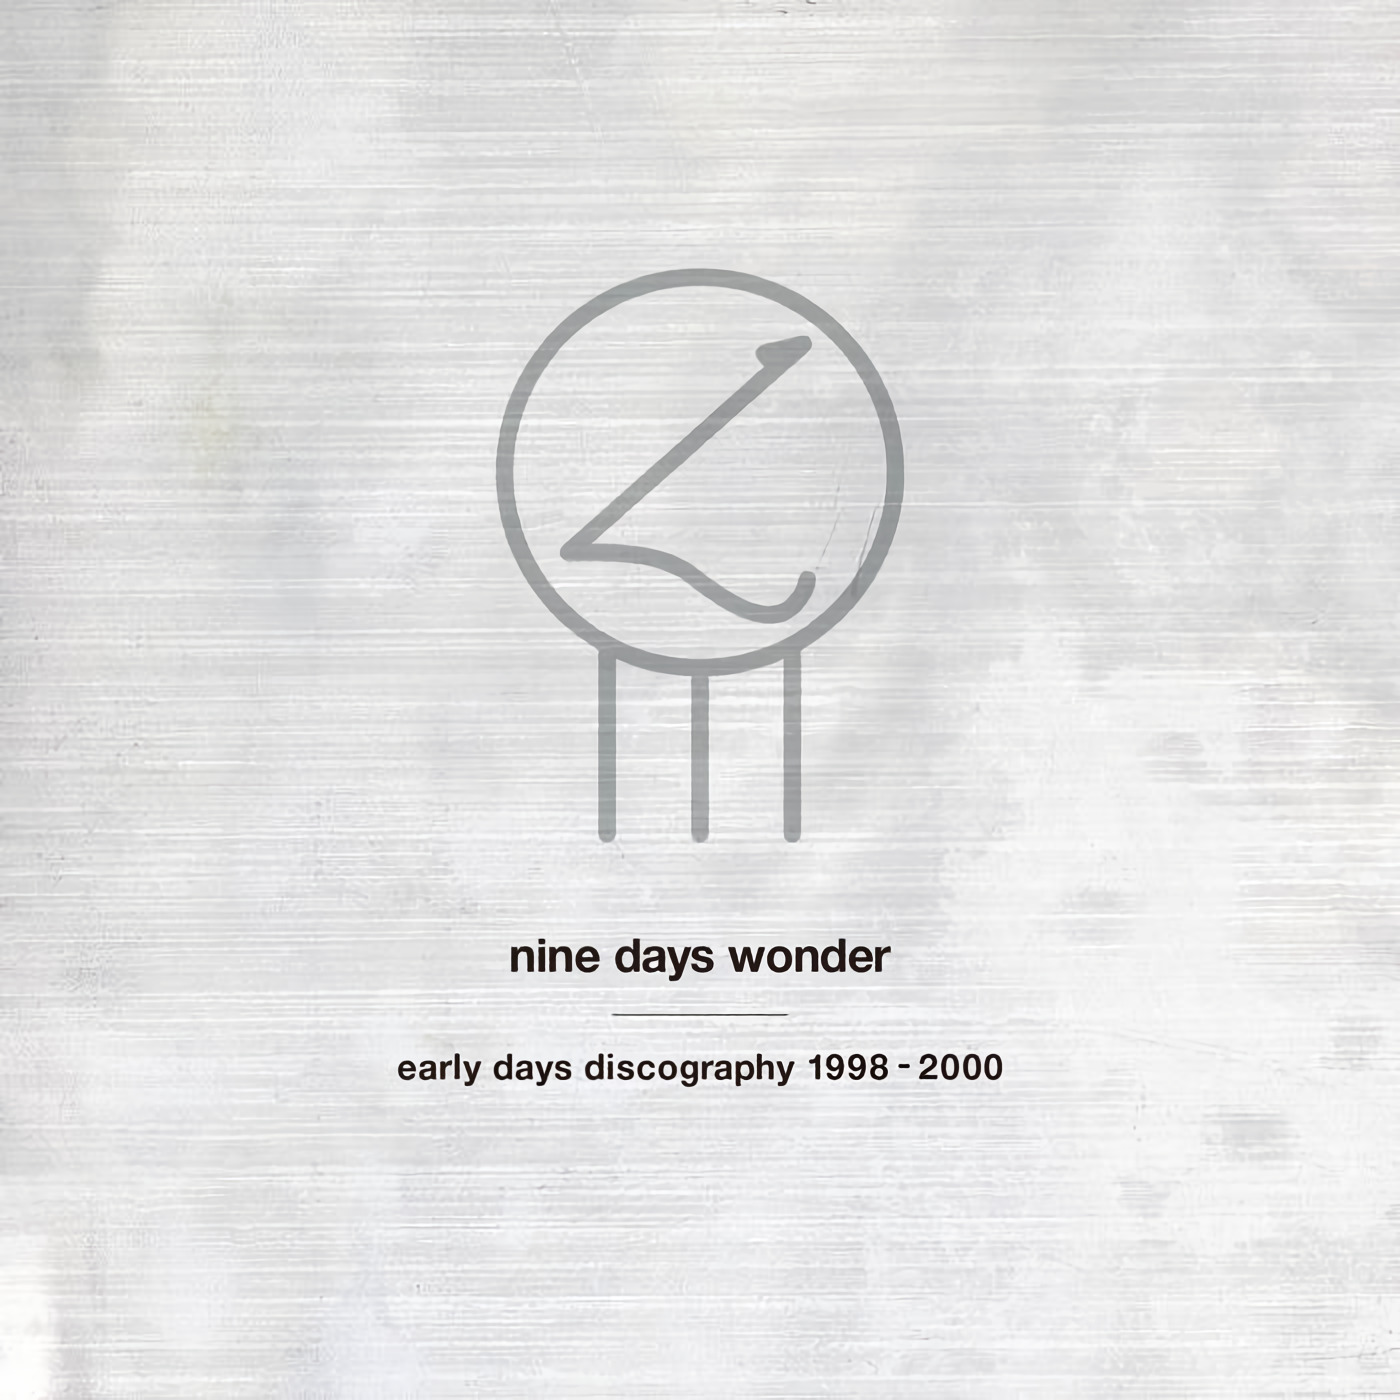 early days discography 1998 - 2000 / nine days wonder